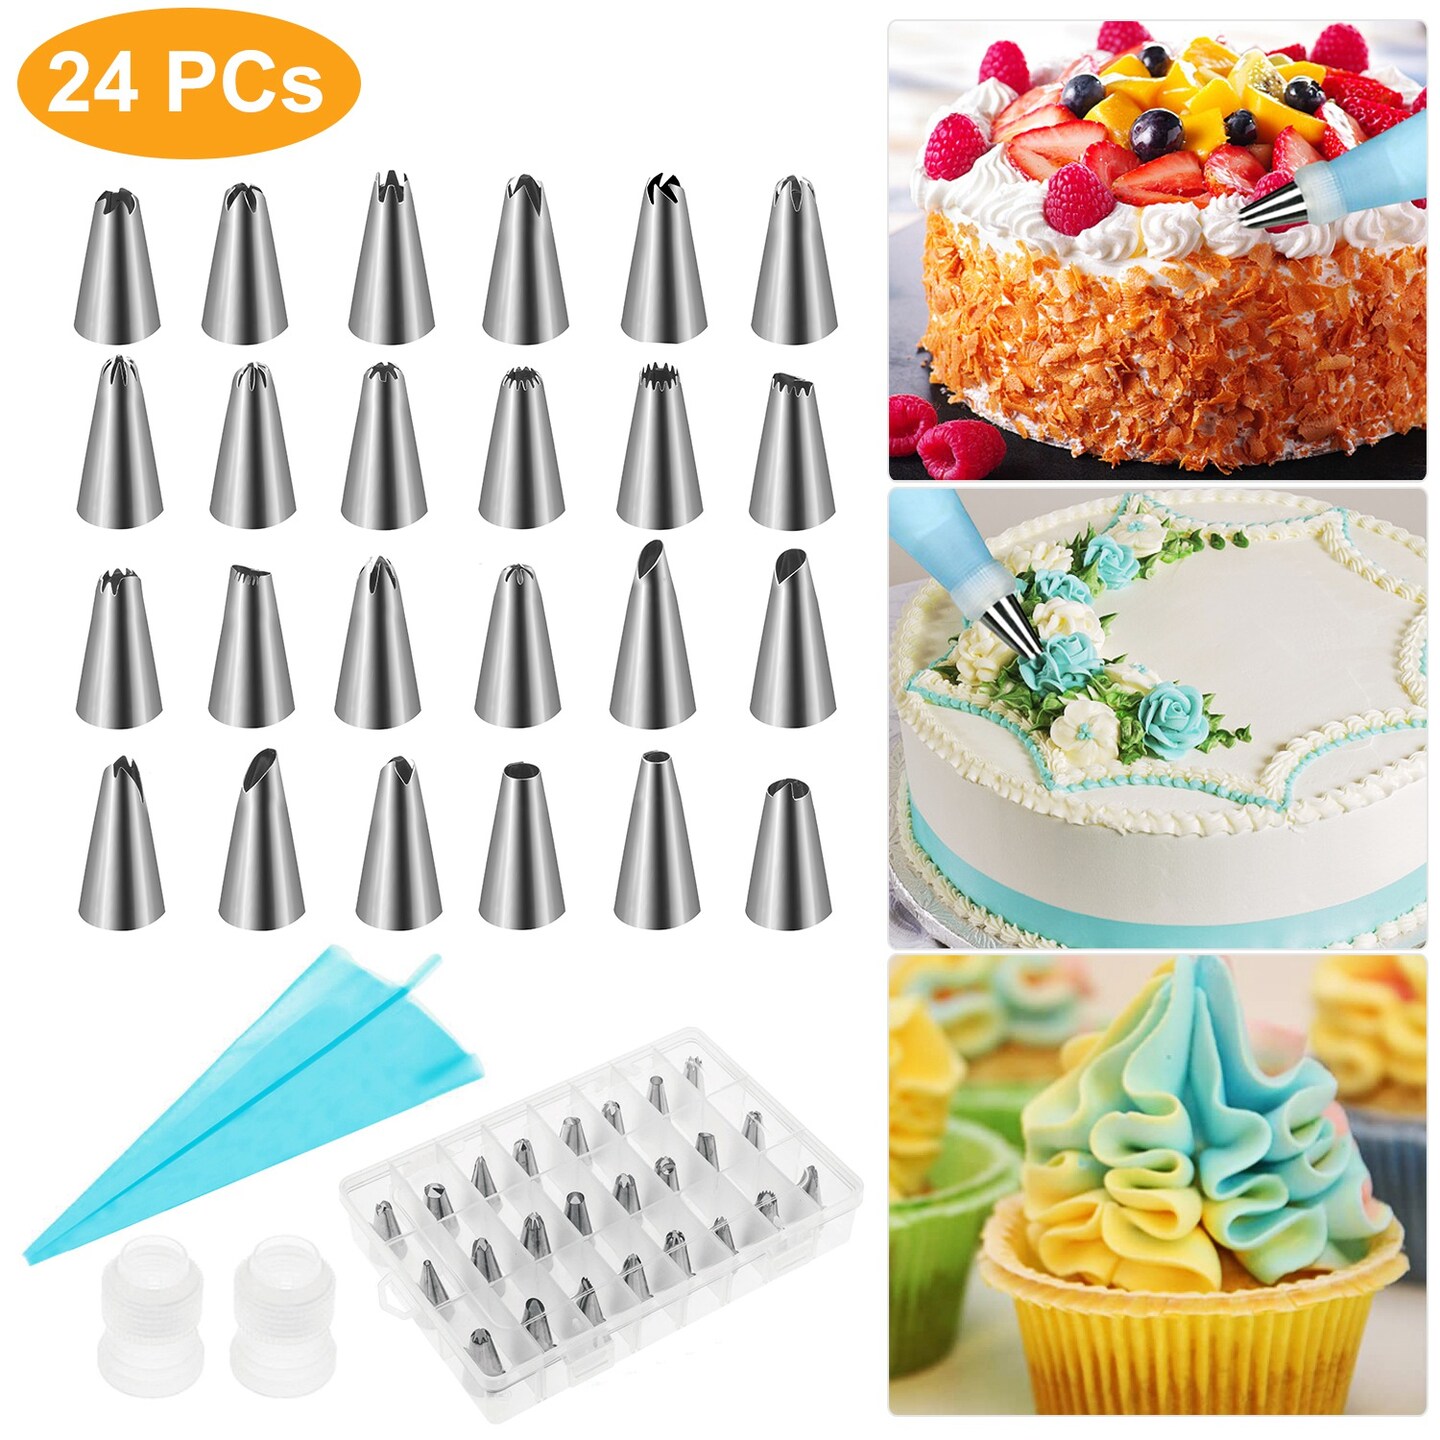 Cake Decorations Accessories | Pastry Pastry Accessories | Cake Decorating  Tips Set - Silk Flower Tool - Aliexpress